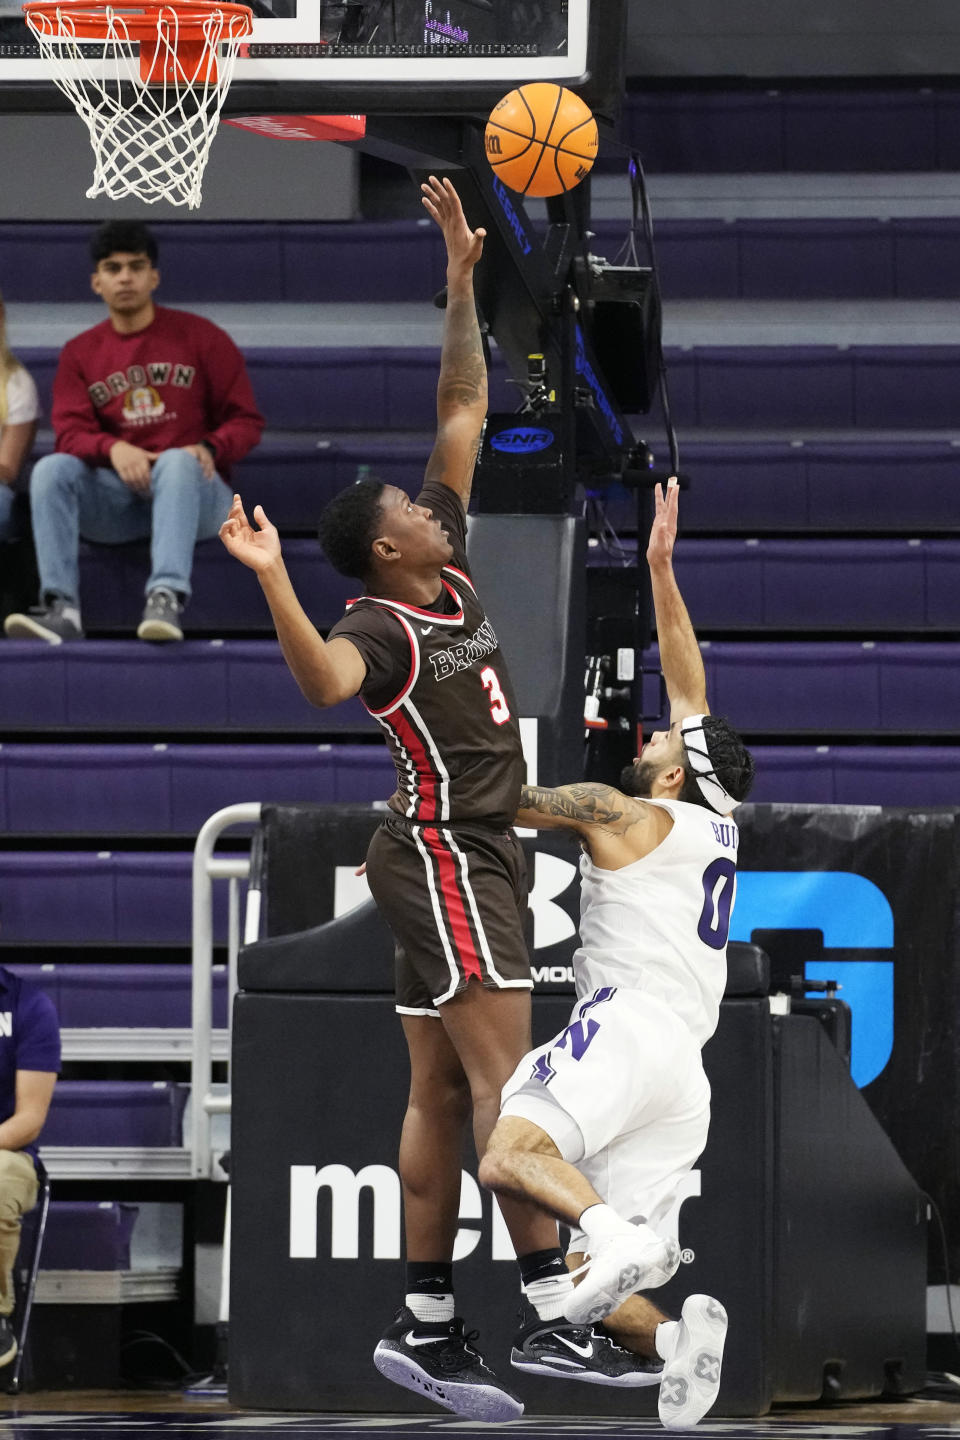 Northwestern guard Boo Buie, right, shoots over Brown guard Perry Cowan during the first half of an NCAA college basketball game in Evanston, Ill., Thursday, Dec. 29, 2022. (AP Photo/Nam Y. Huh)